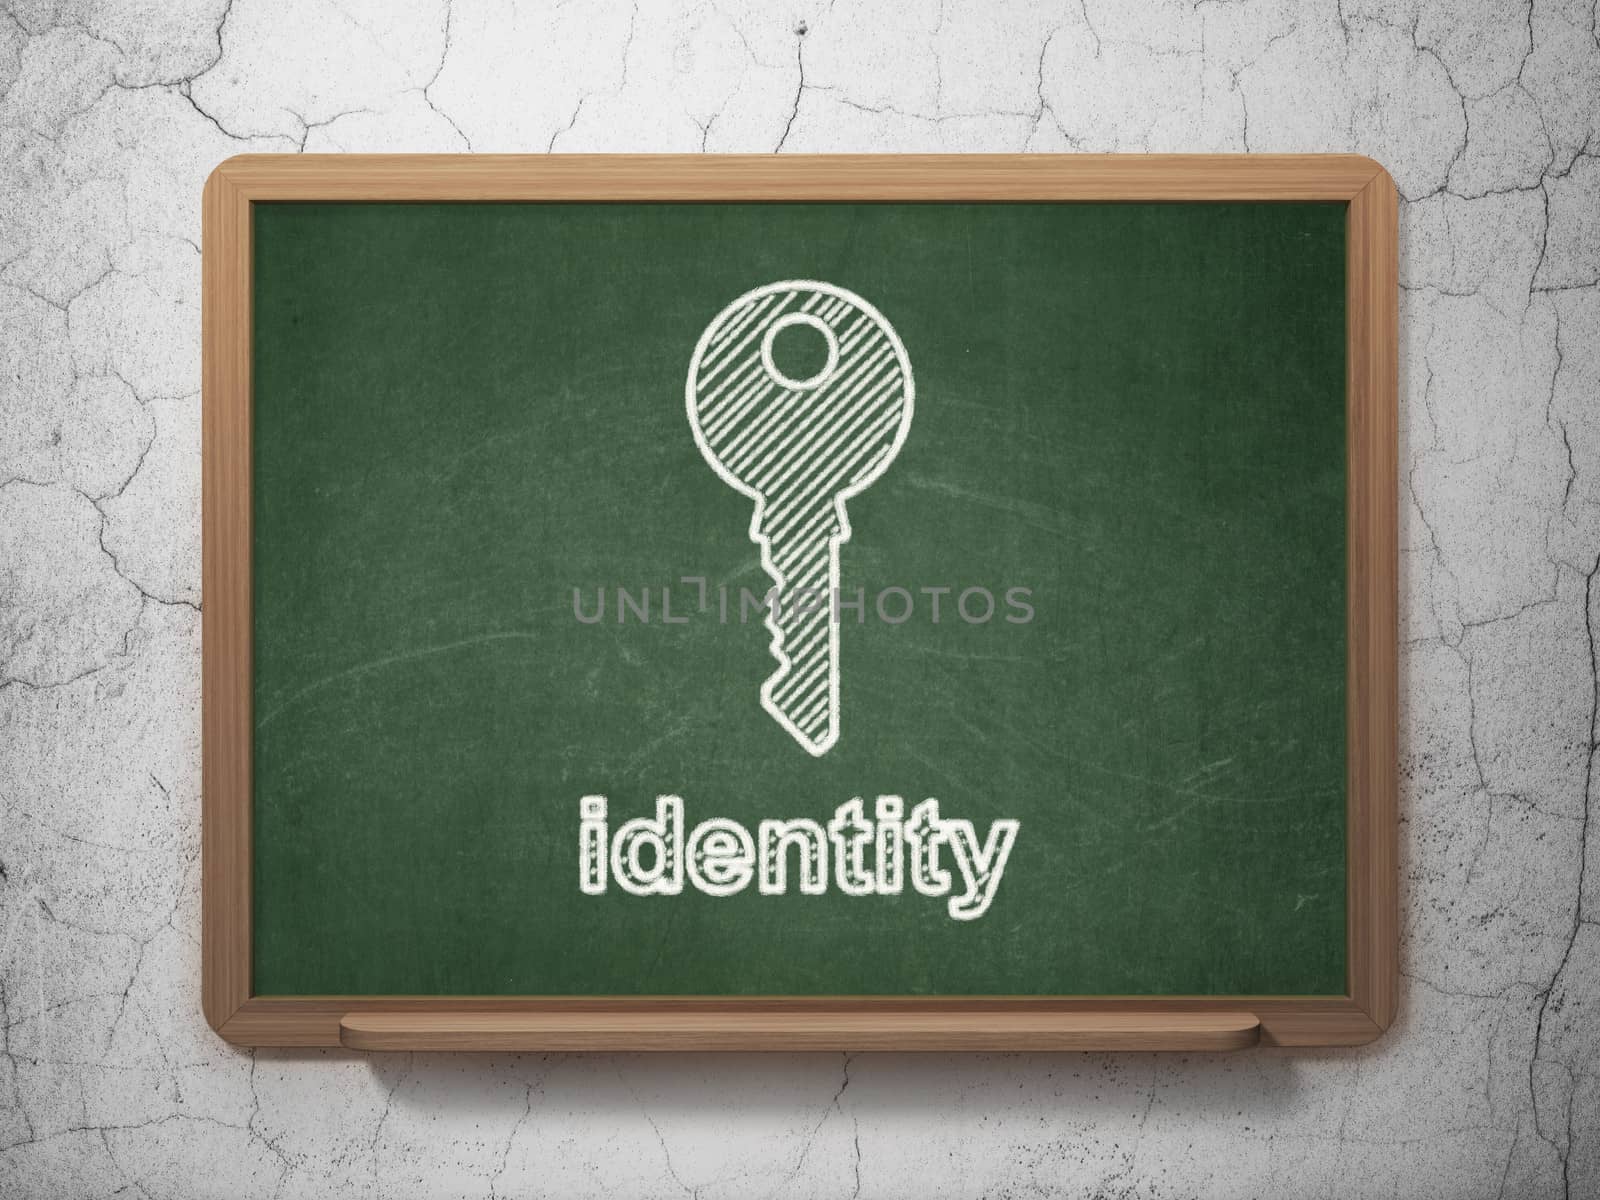 Safety concept: Key icon and text Identity on Green chalkboard on grunge wall background, 3d render